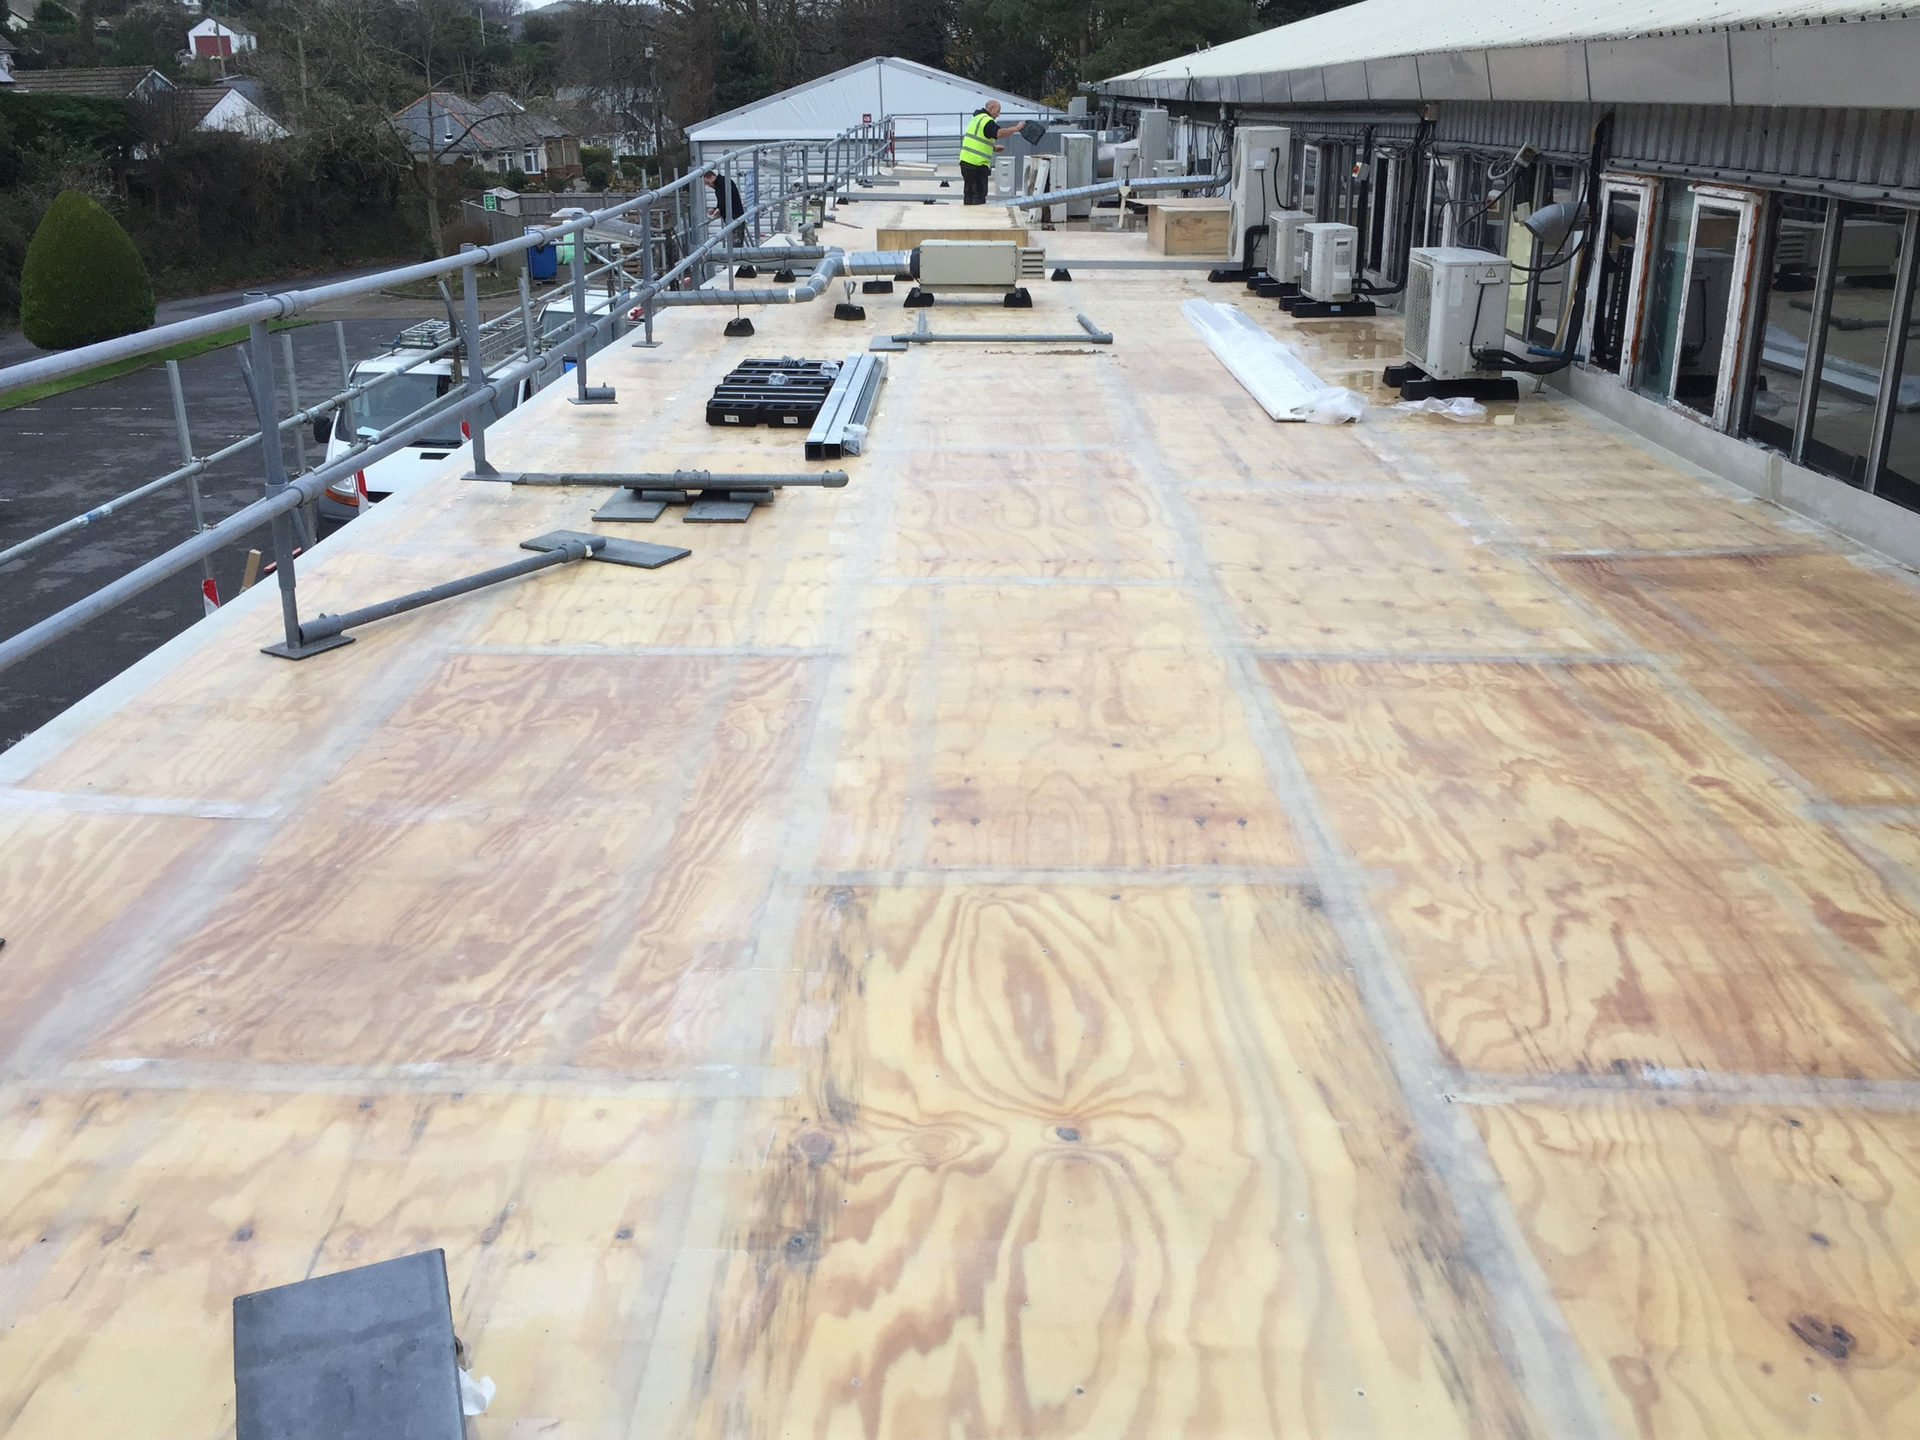 340m2 roof fiber-glassed and water tight in three weeks.   the Gel coat was later applied in sections to allow for moving around air units and other obstacles on the roof.  This was a very challenging project and by far not easy to complete with weather conditions and restriction on site, however the customer was happy the factory could continue throughout the working process. All work carried out by MJS Building Maintenance LTD.